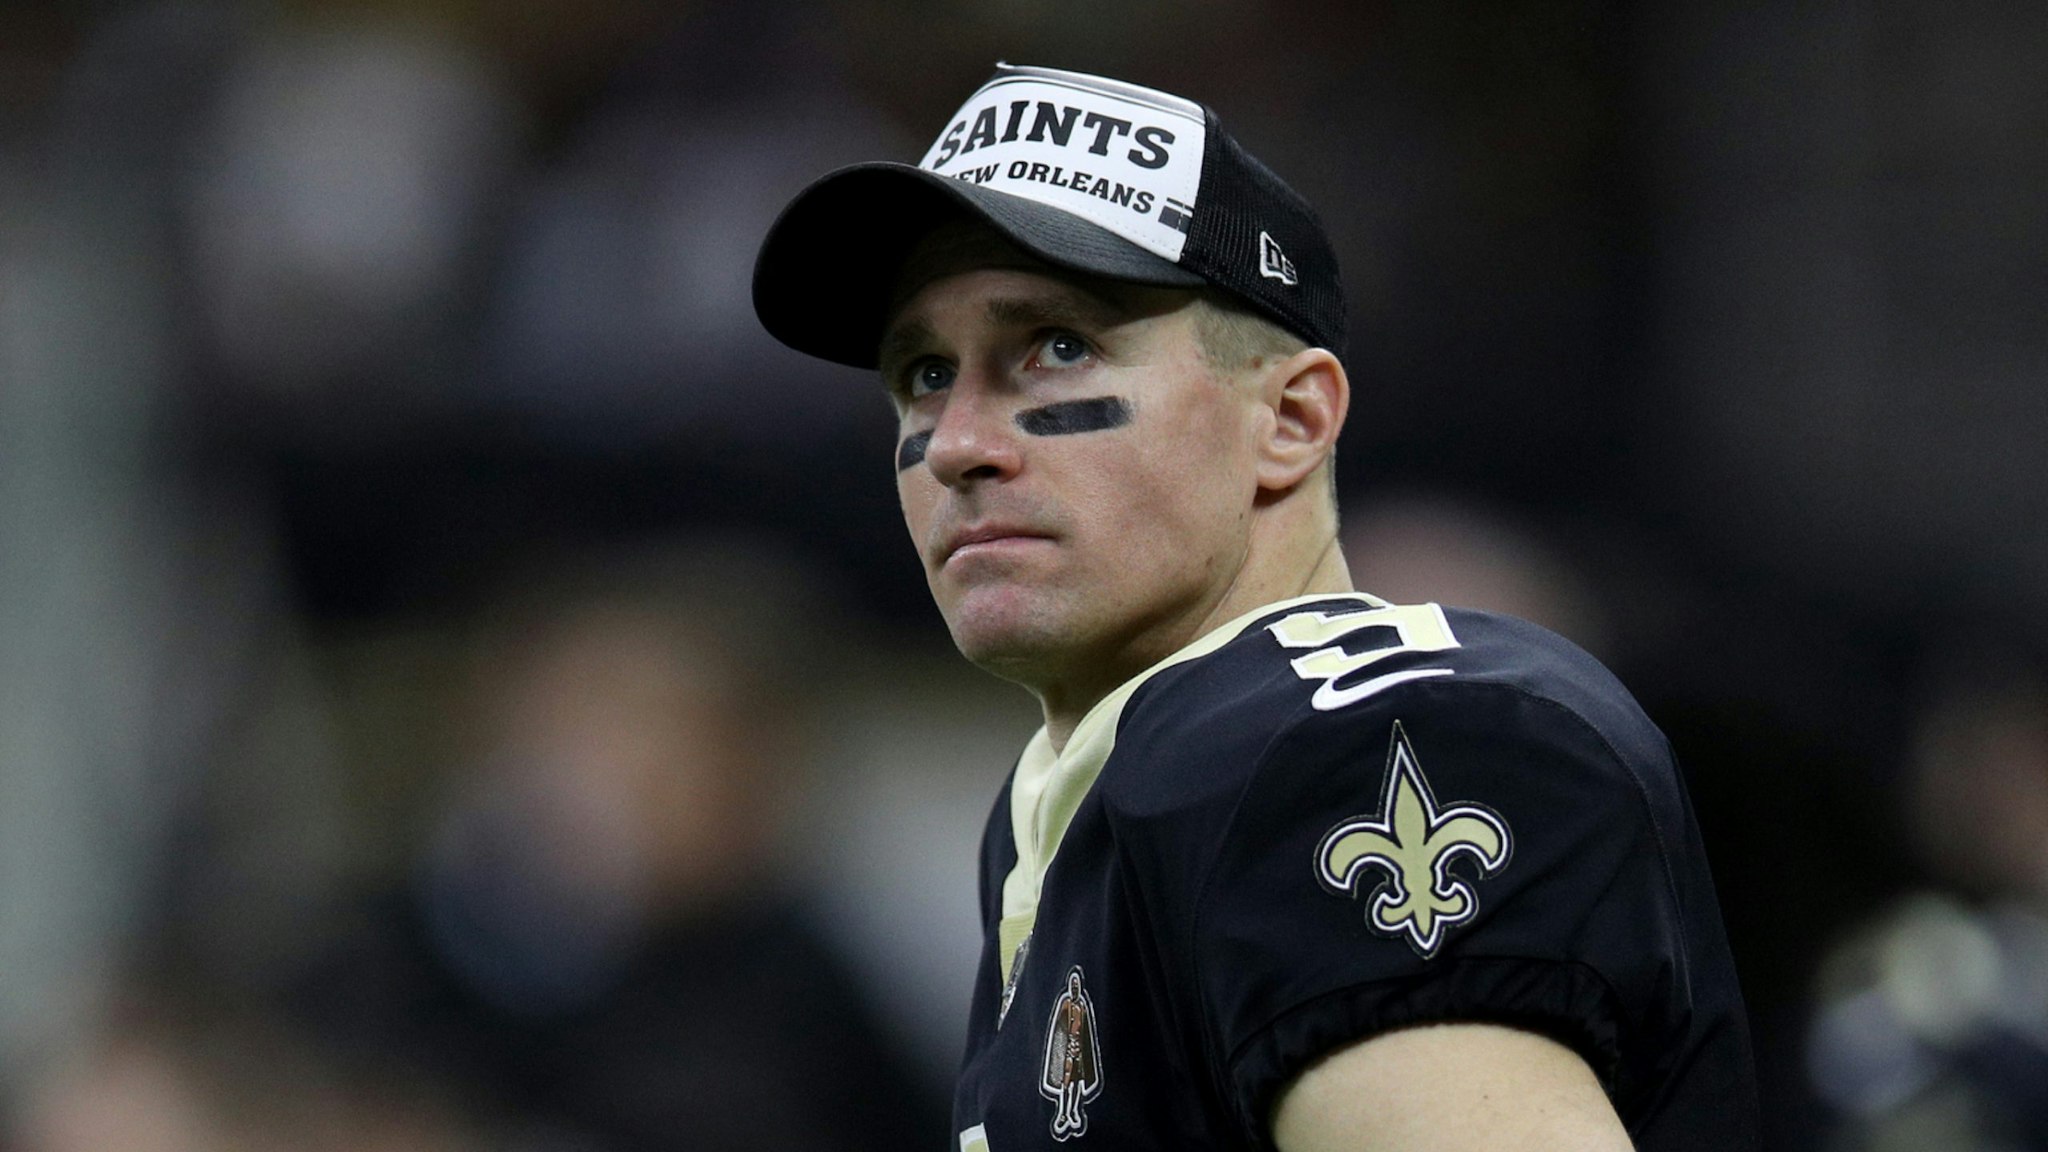 Drew Brees #9 of the New Orleans Saints reacts on the sideline against the San Francisco 49ers in the game at Mercedes Benz Superdome on December 08, 2019 in New Orleans, Louisiana.